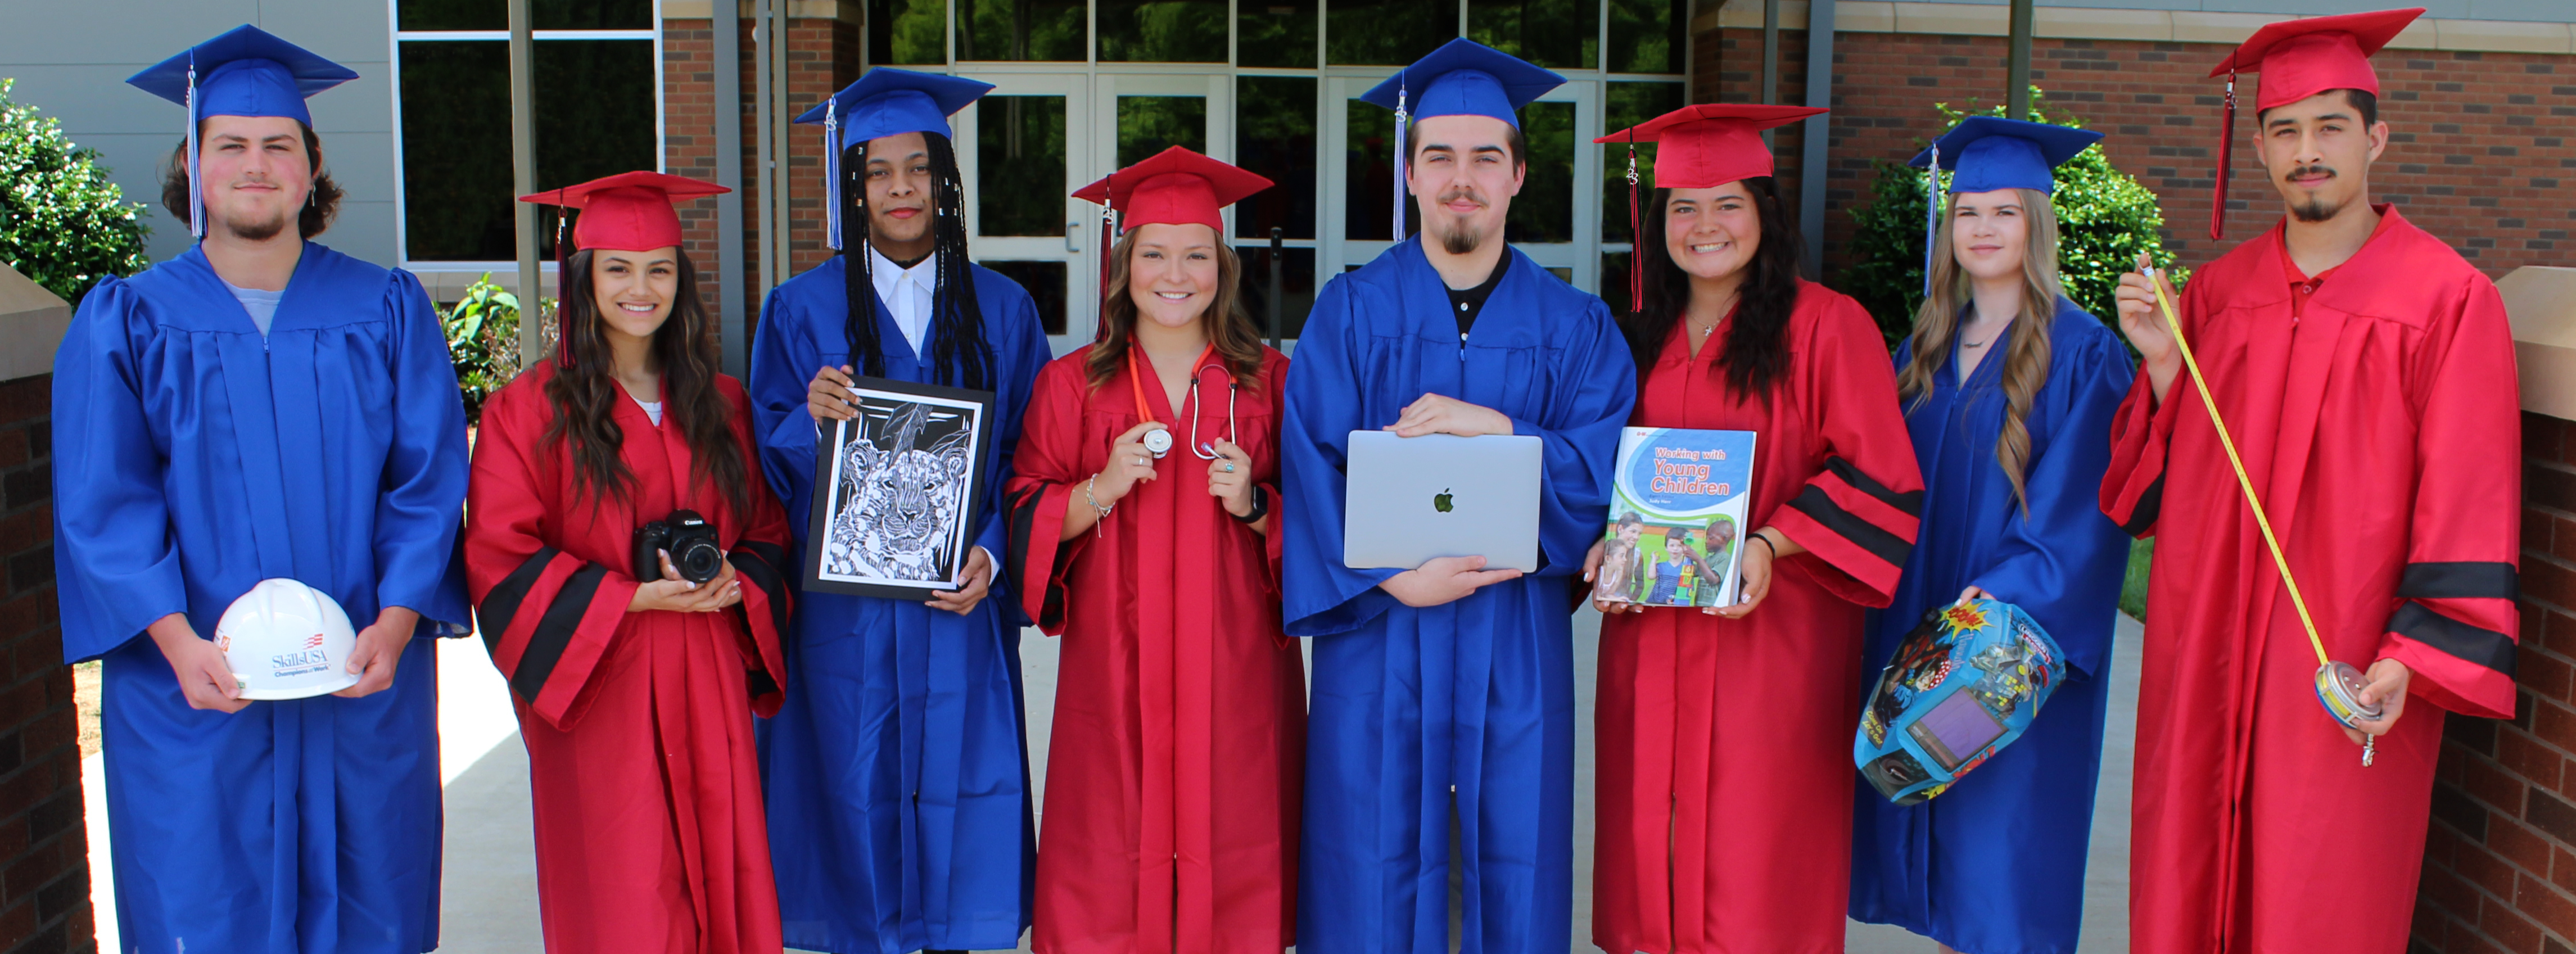 A group of graduating seniors wear their cap and gowns and hold items they will use in their future careers